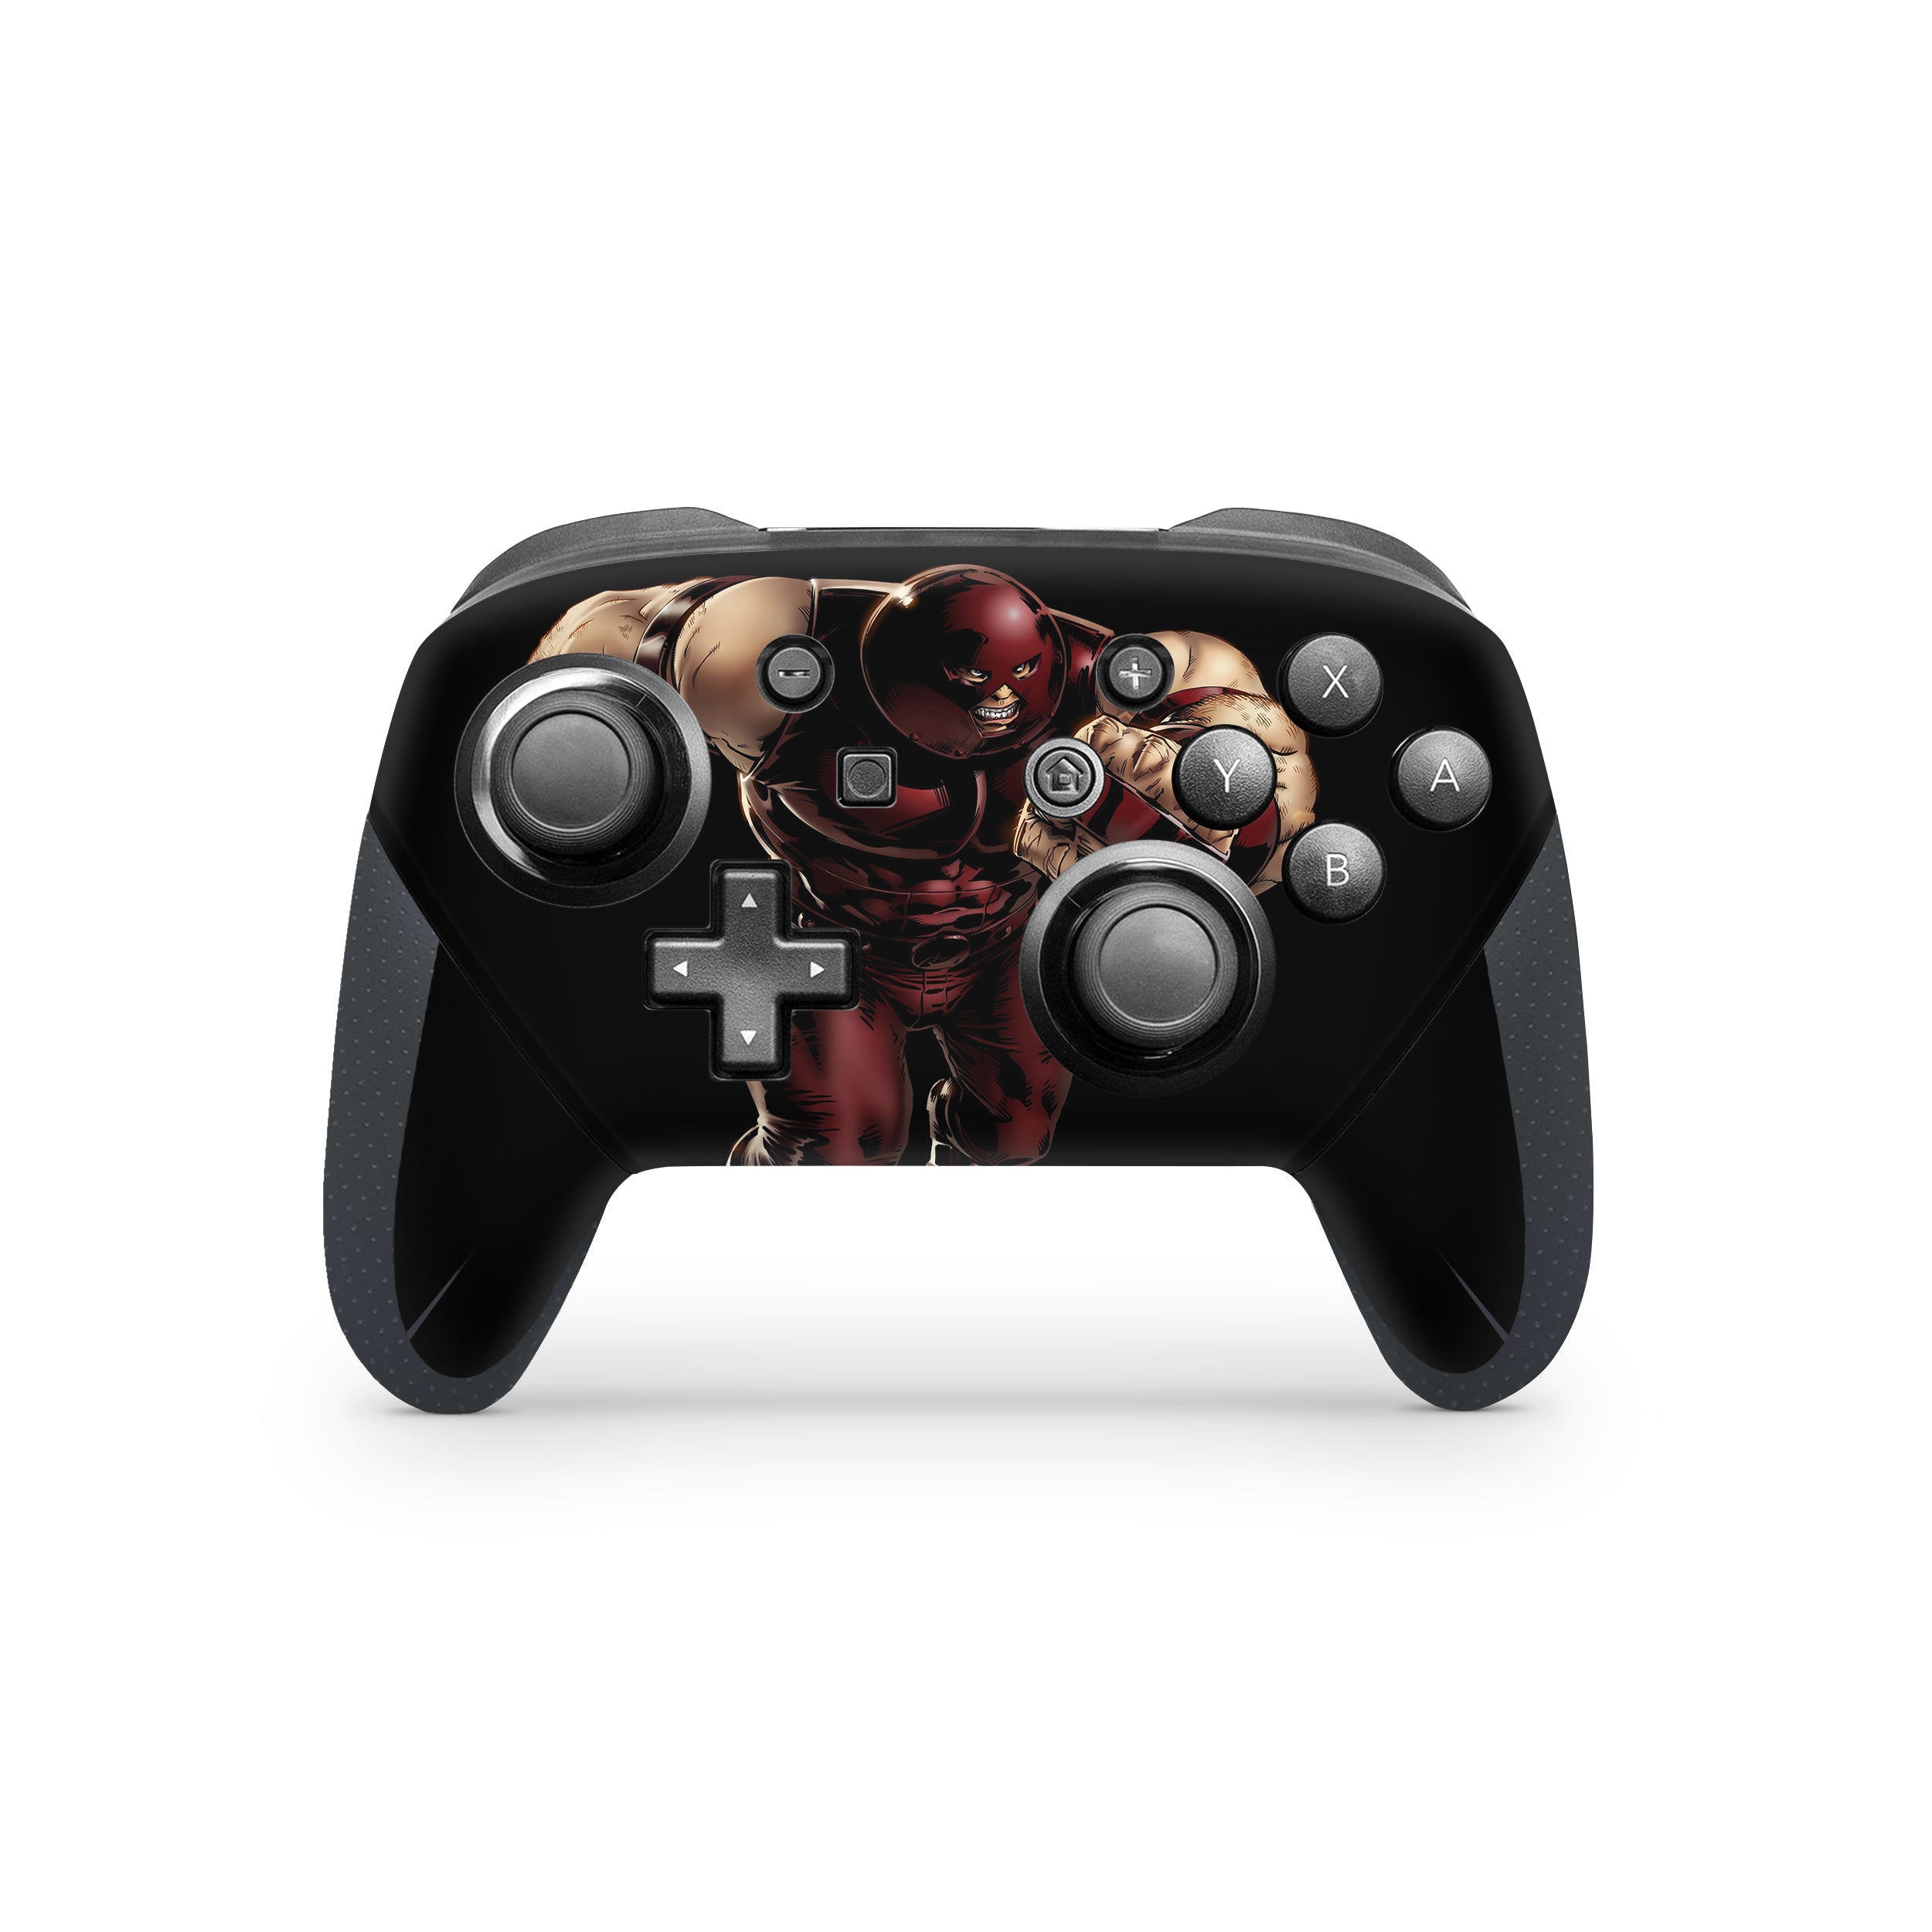 A video game skin featuring a Marvel Comics X Men Juggernaut design for the Switch Pro Controller.